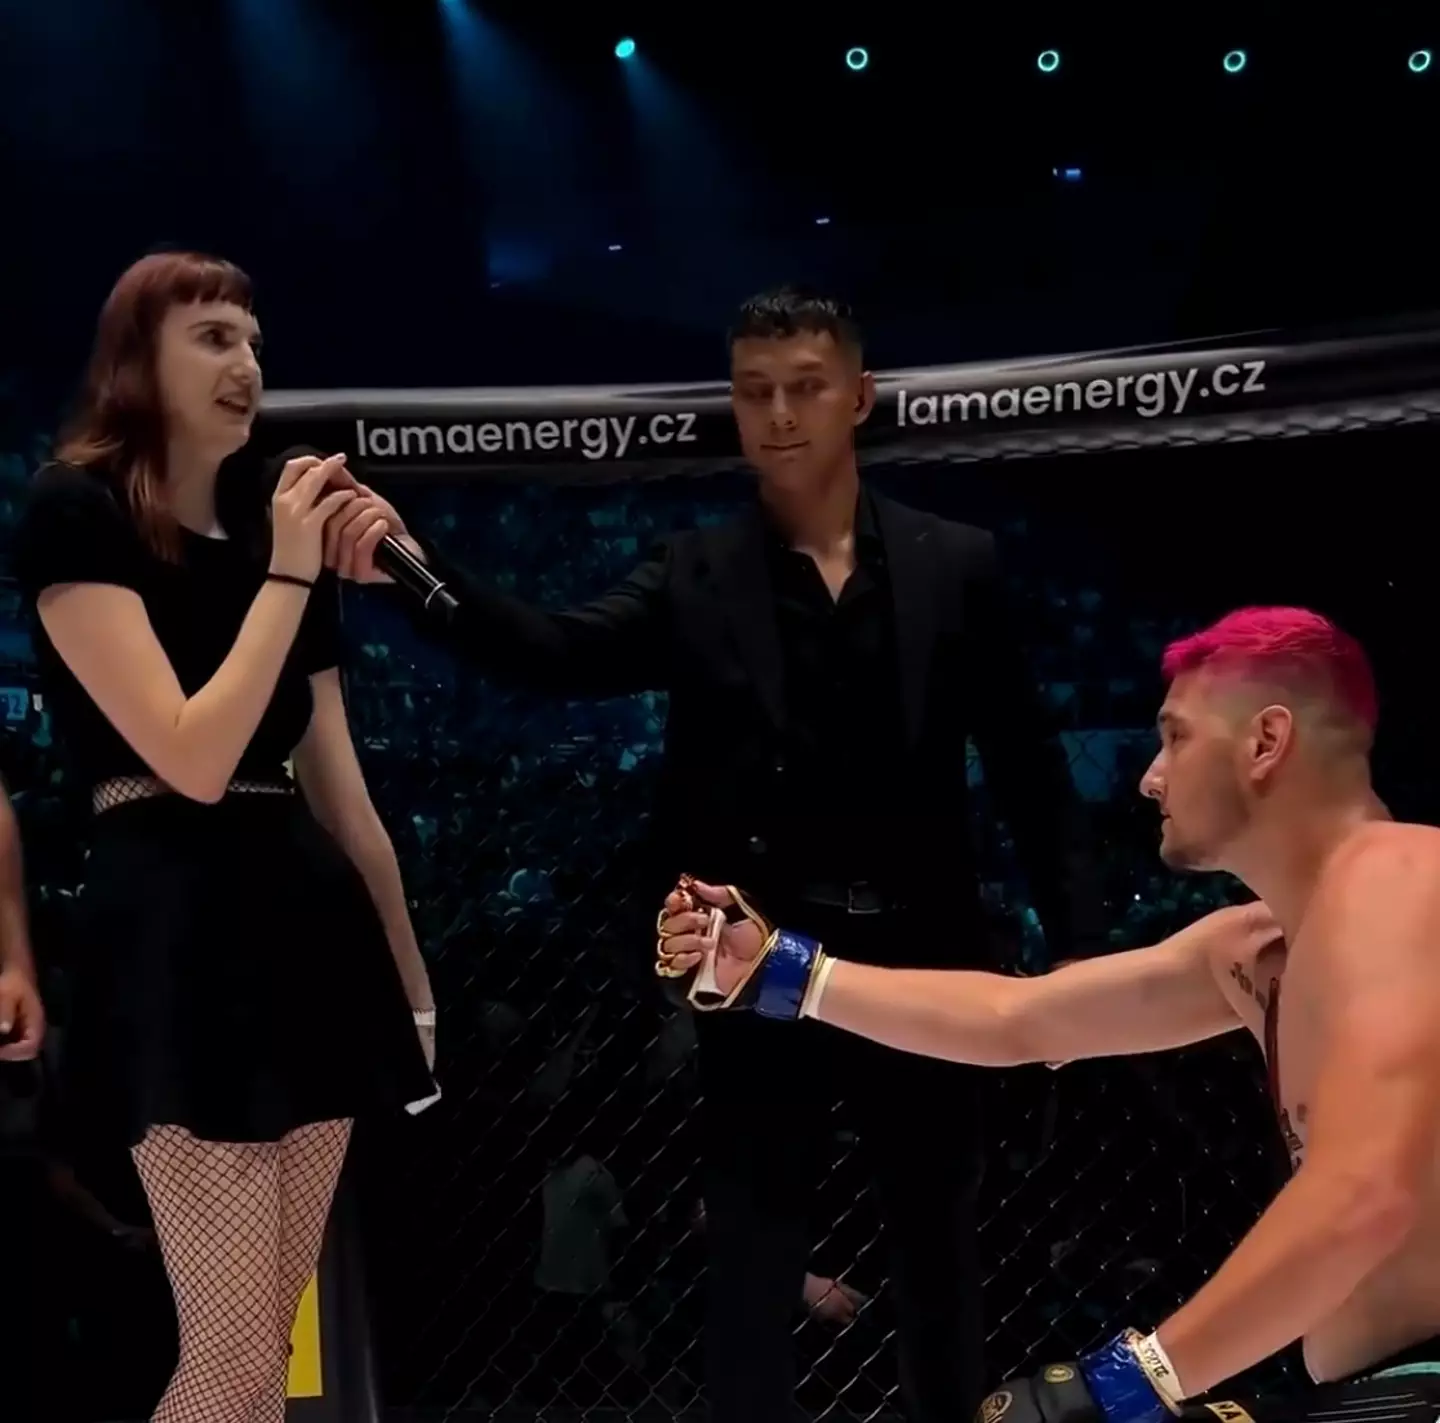 The MMA star's partner turned down his offer in front of thousands of spectators (X/@HappyPunch)